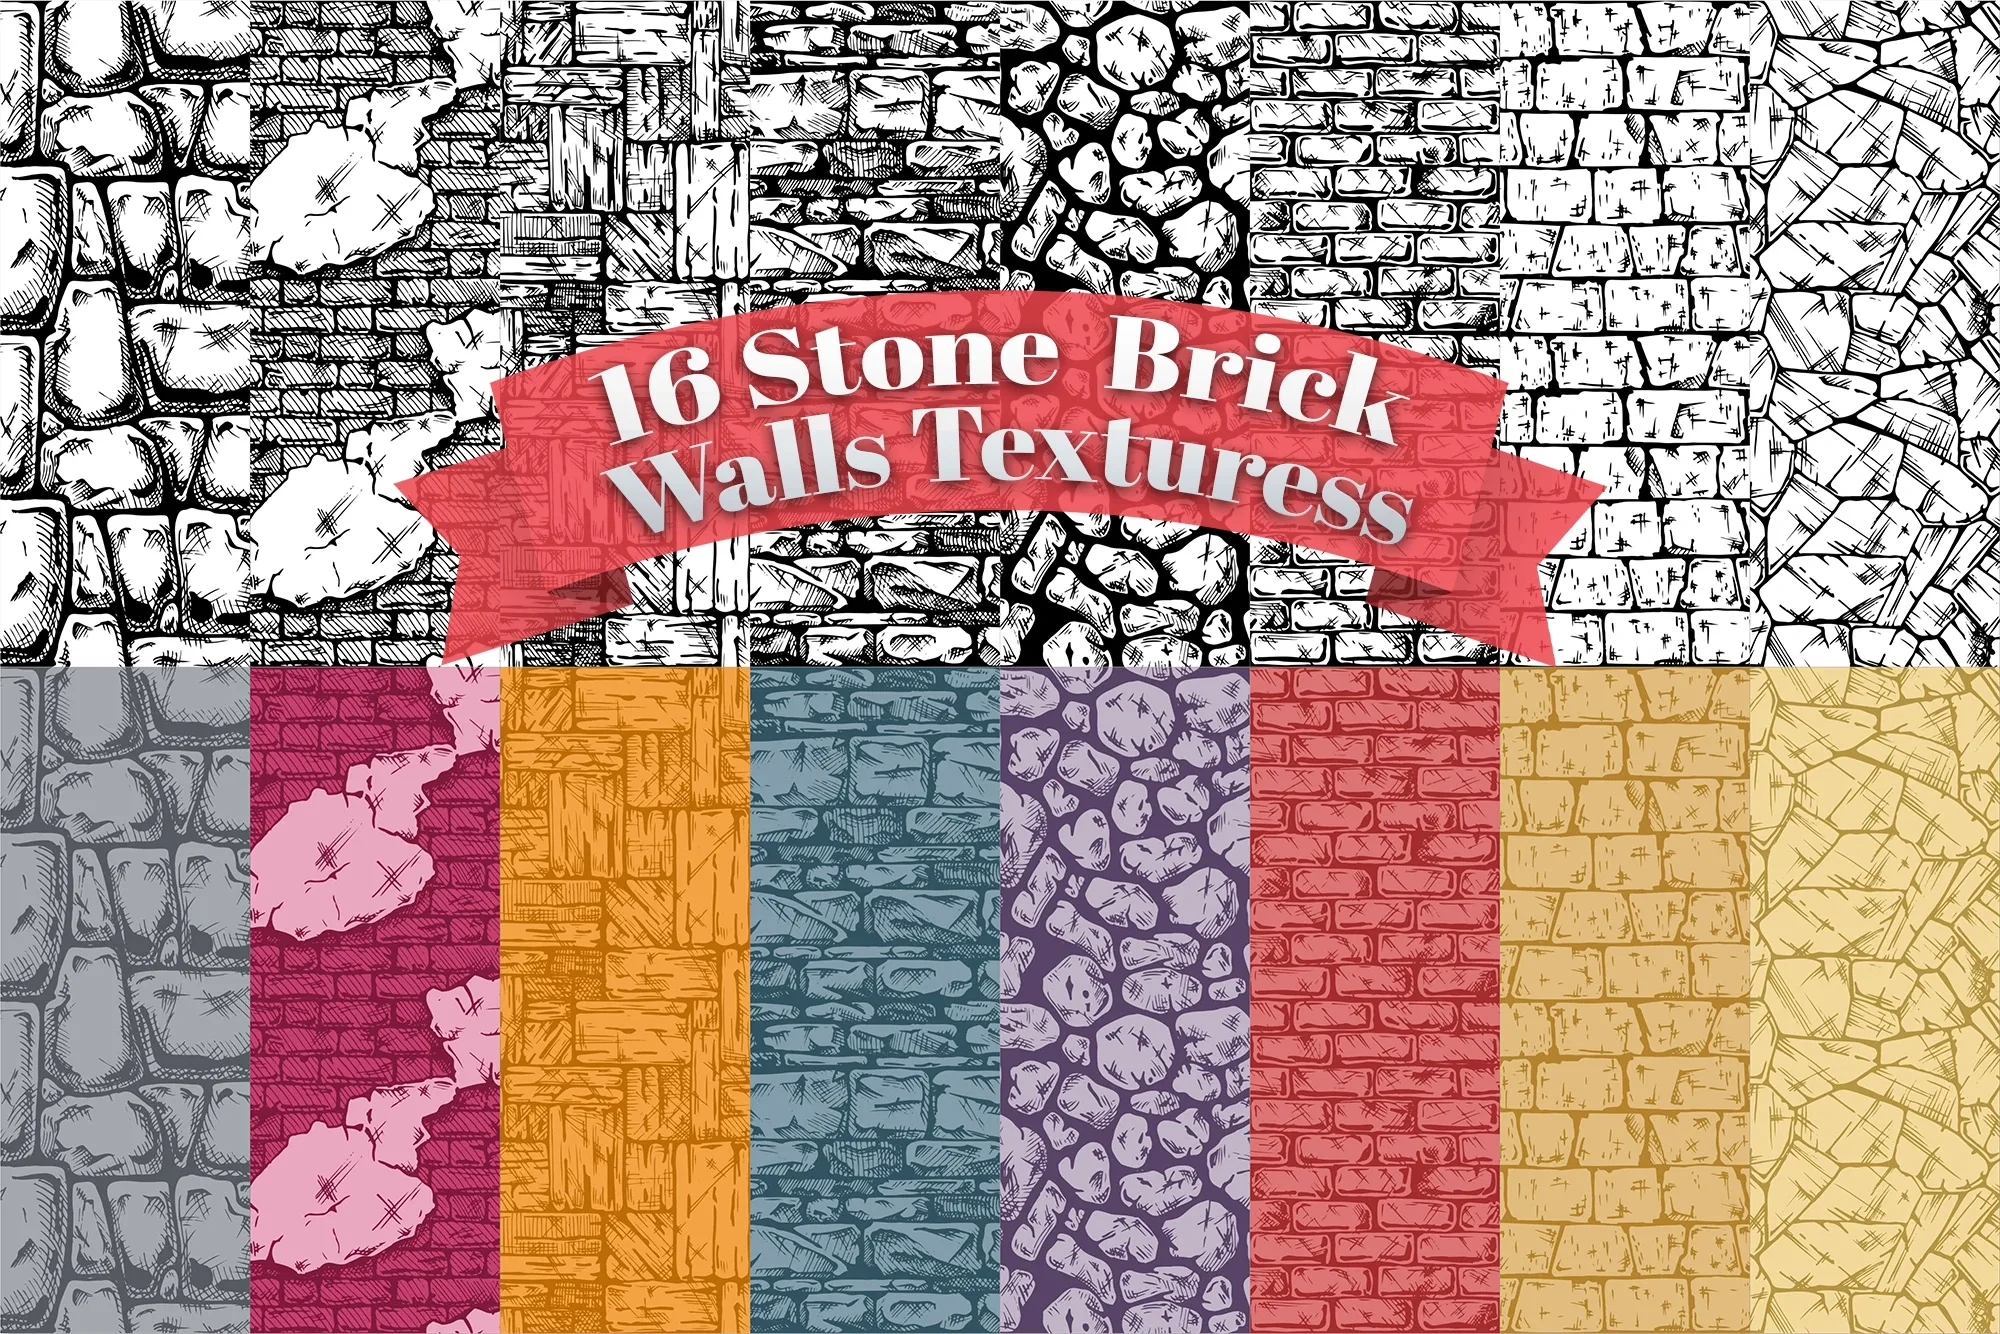 16 Stone, Brick, Walls Textures, Seamless Pattern Stone, Old Wall, Paving, Rock Background, EPS File